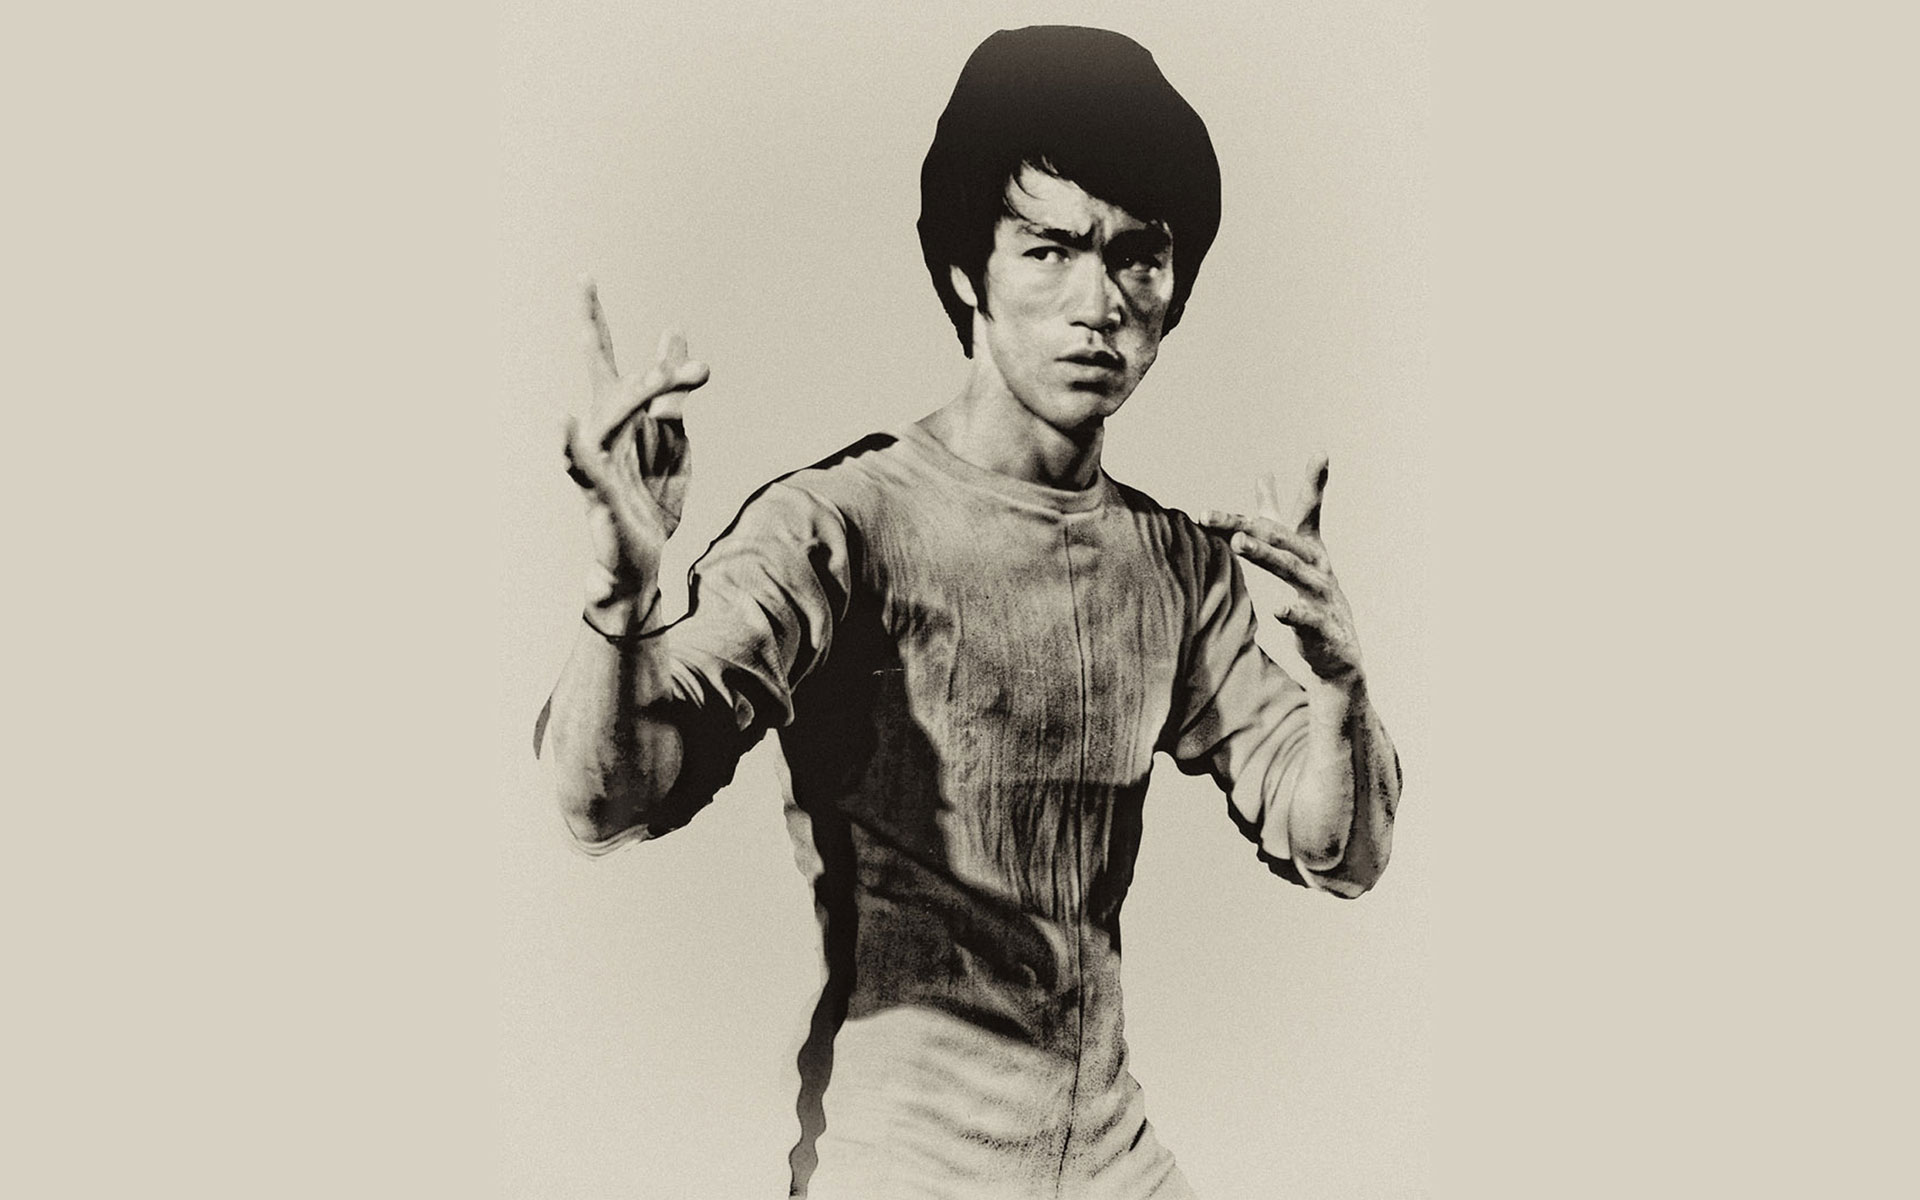 BRUCE LEE’S MMA LEGACY: BE WATER